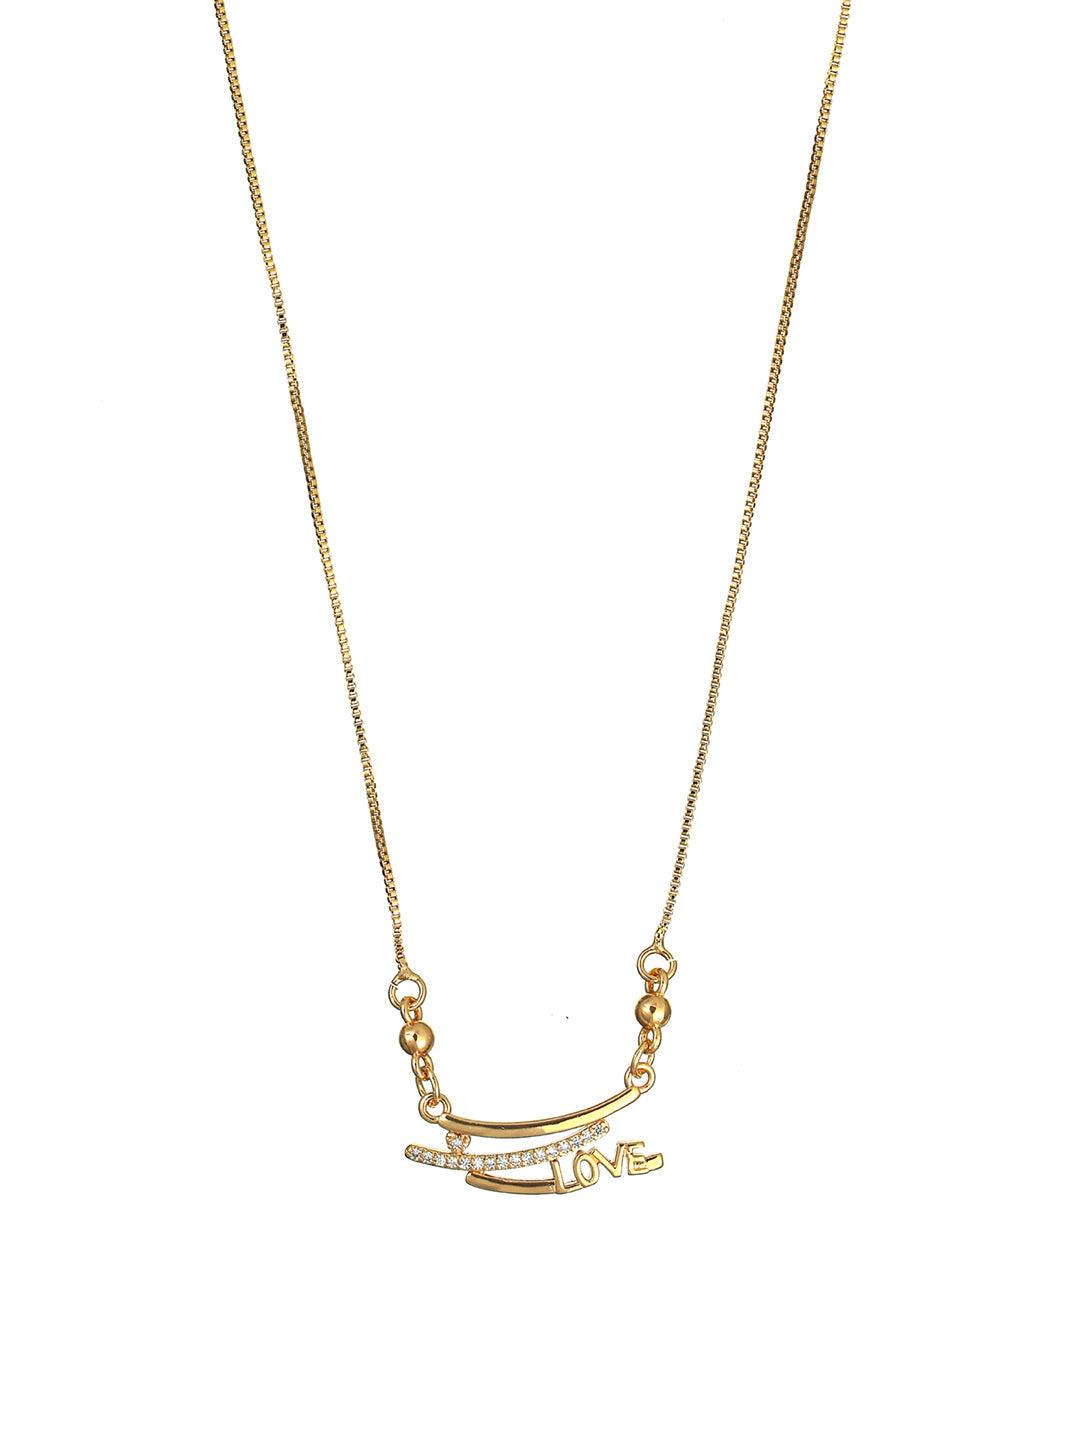 Women's Love American Diamond Gold Plated Necklace - Priyaasi - Indiakreations